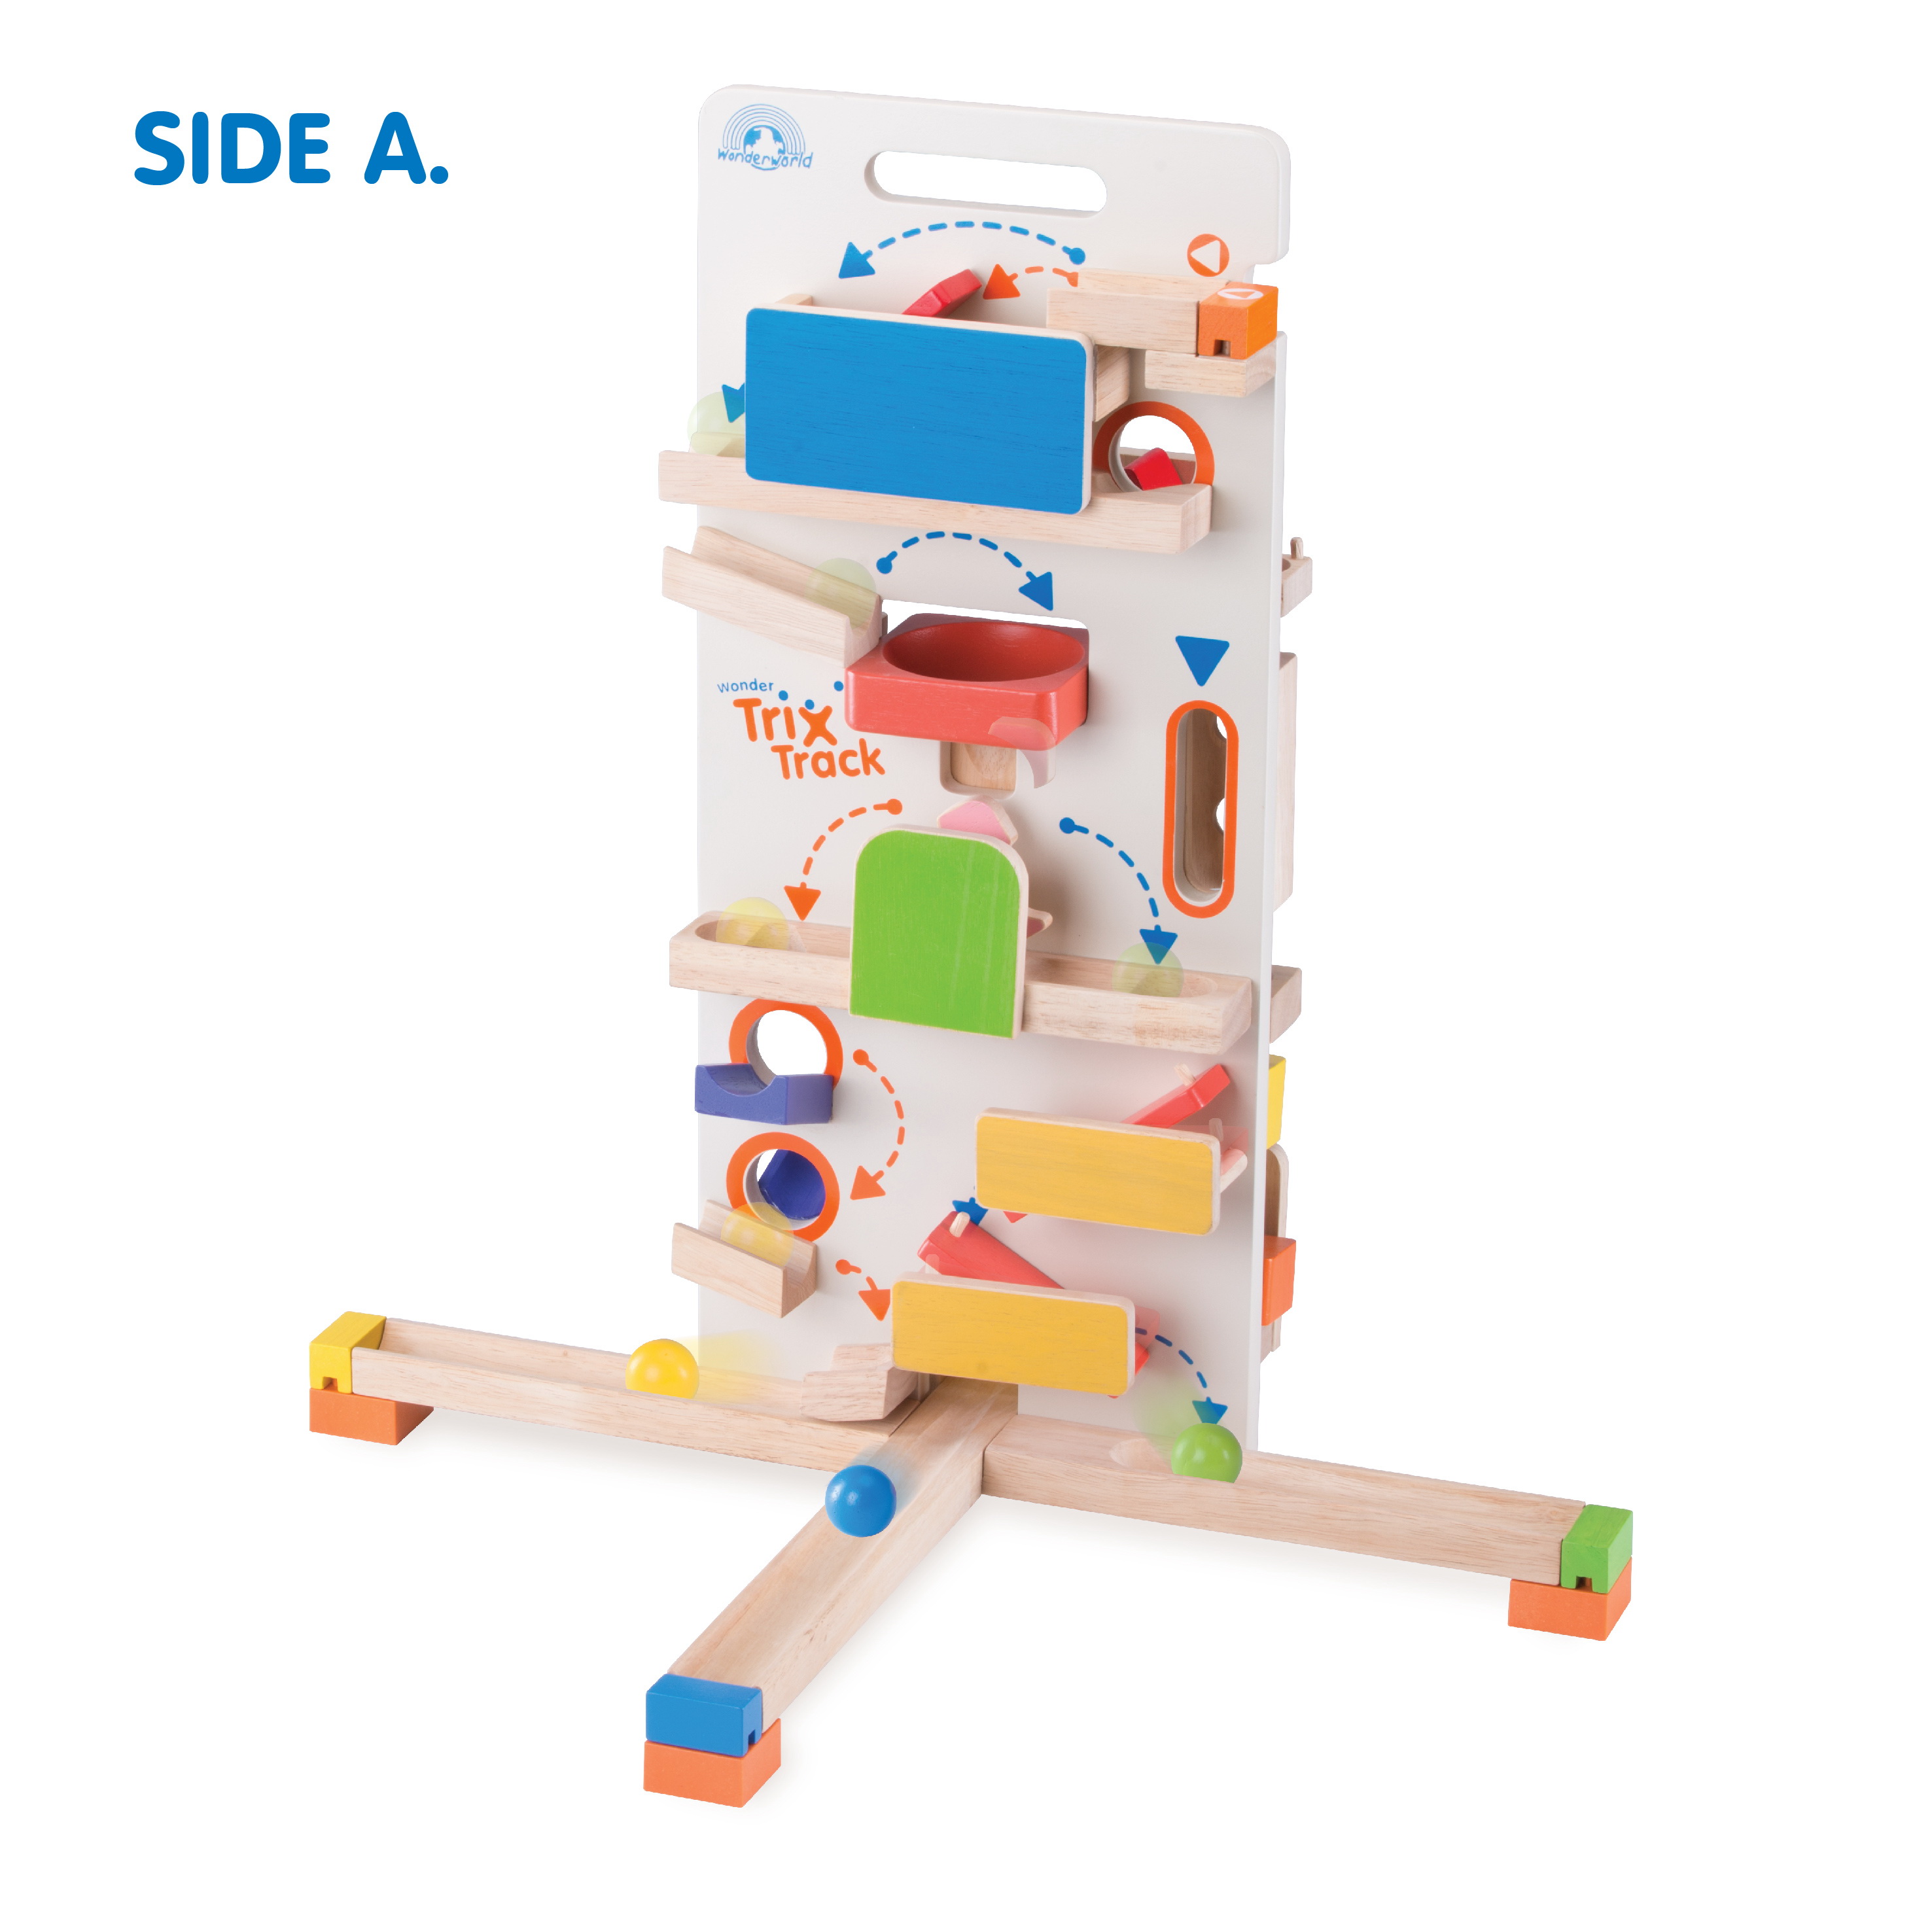 WW-7010 TOWER LAUNCHER | Wonderworldtoy - Natural toys for smart play